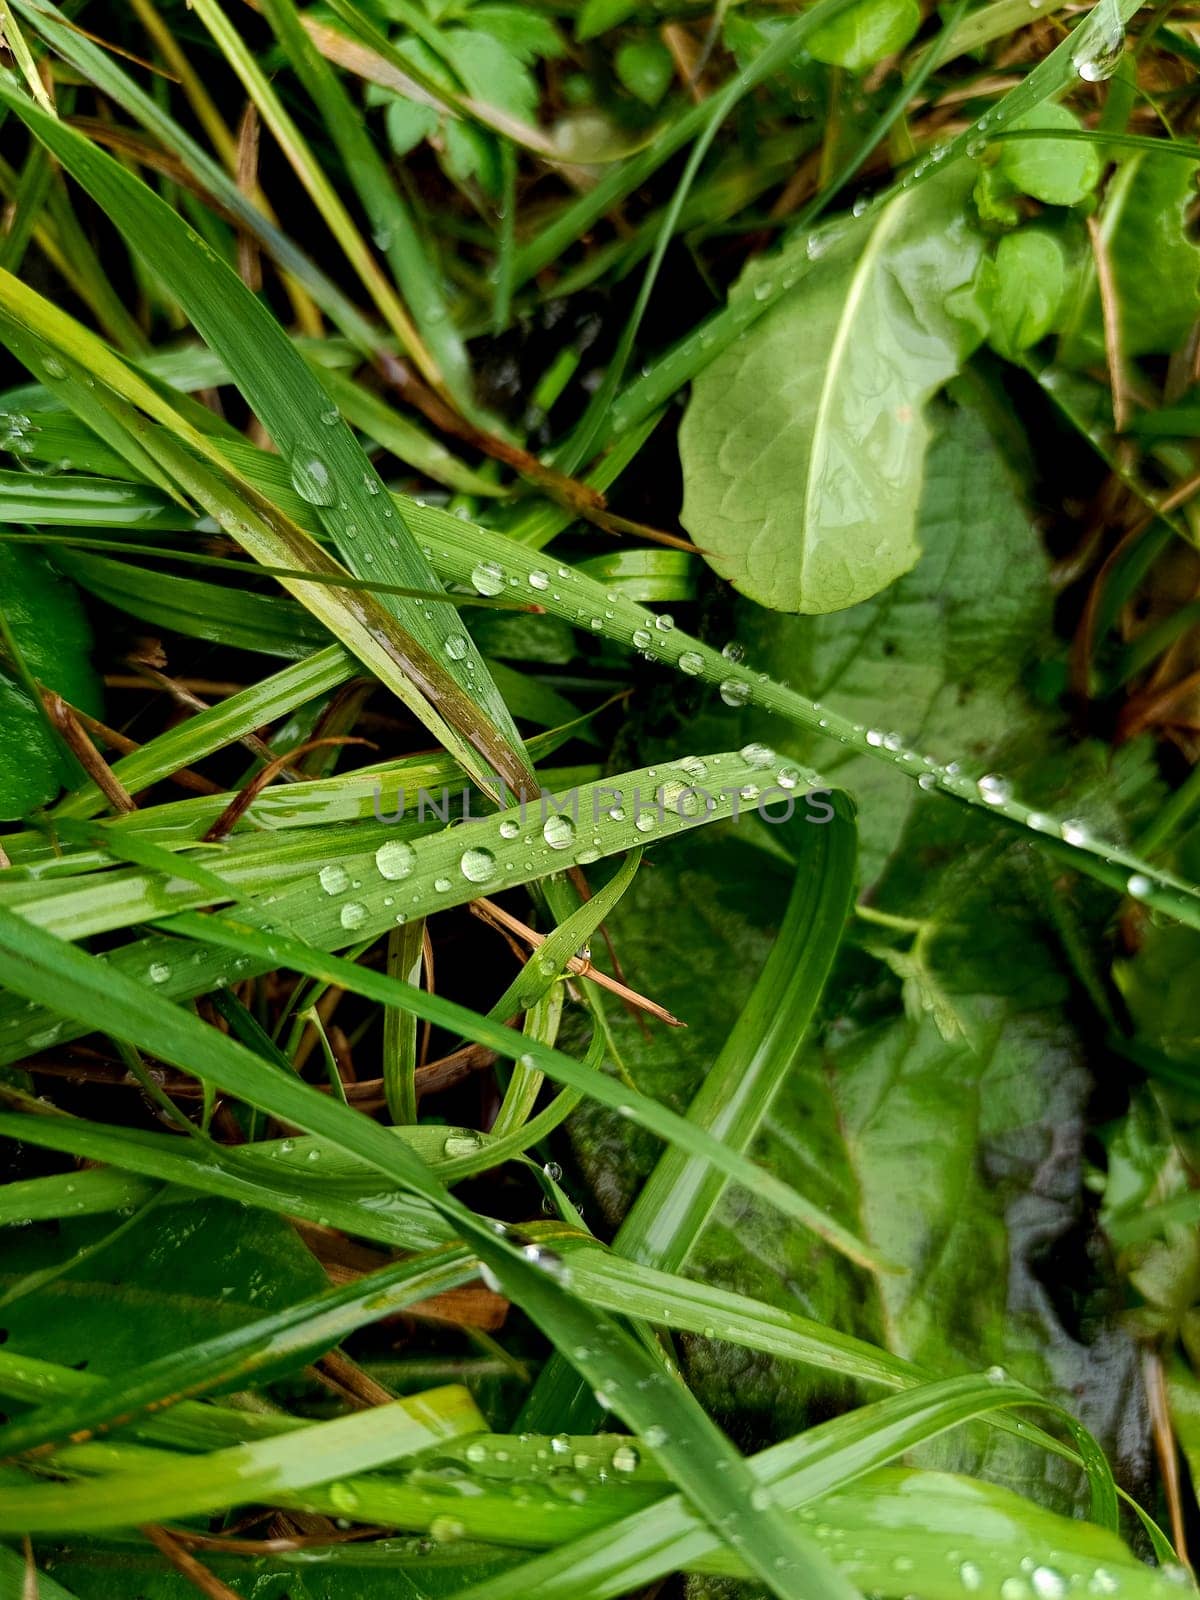 Drops after rain. Dew on the grass. High quality photo